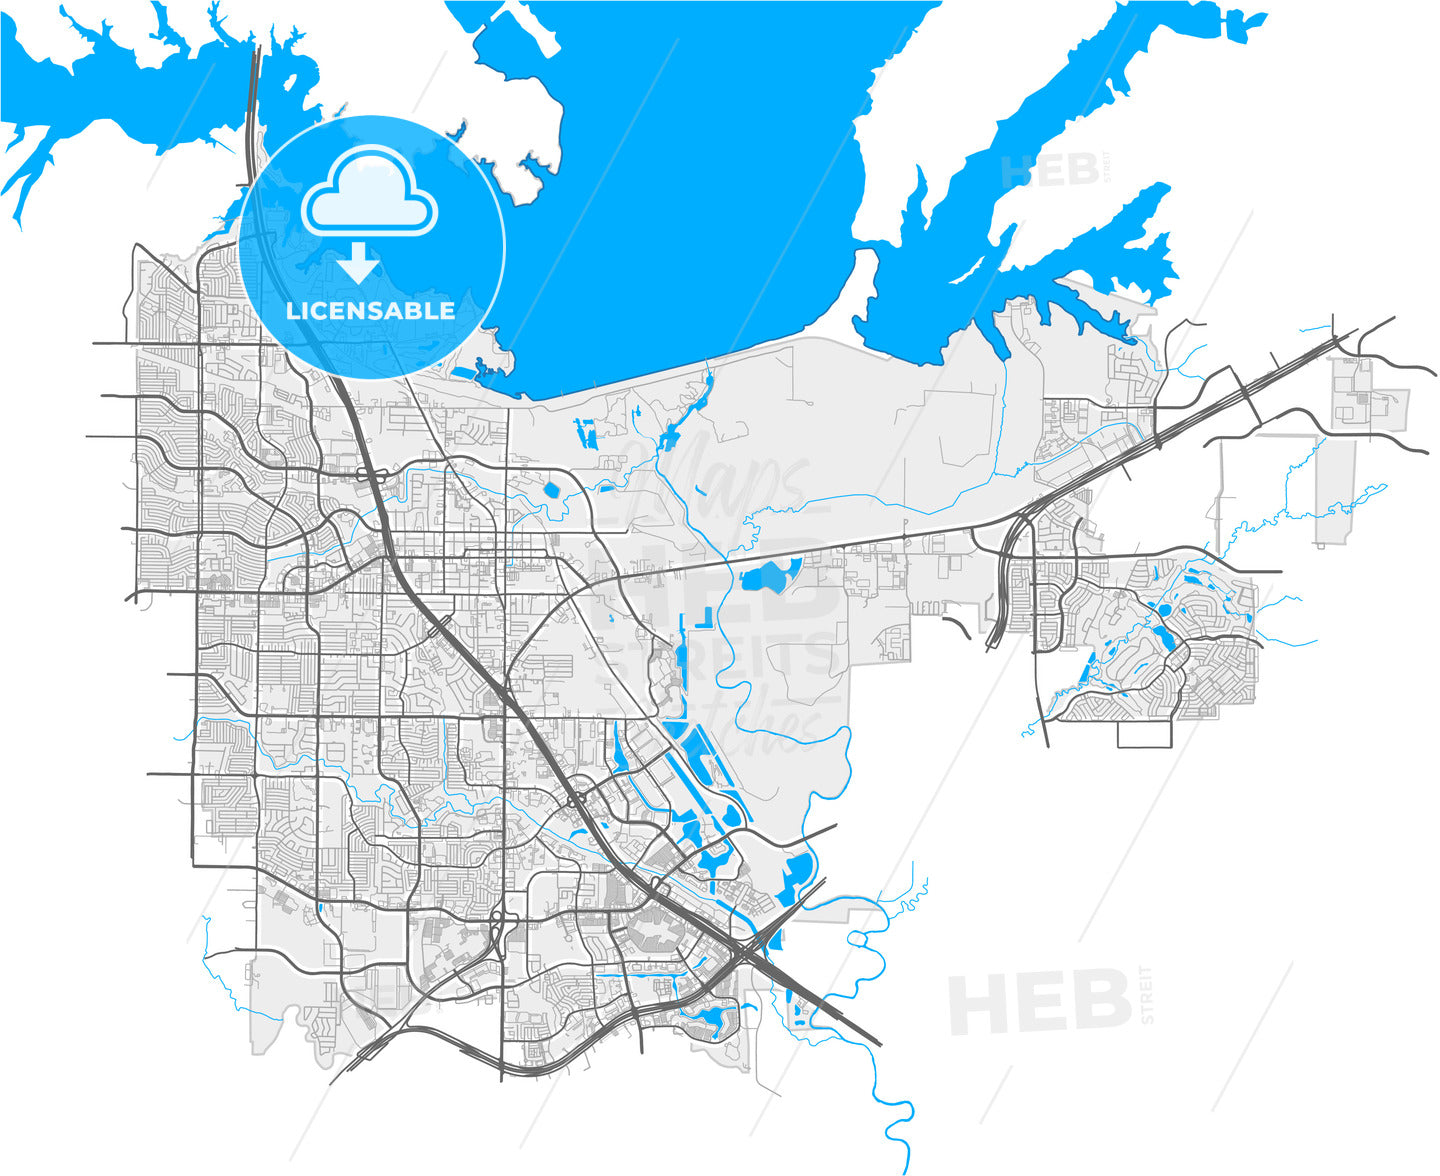 Lewisville, Texas, United States, high quality vector map